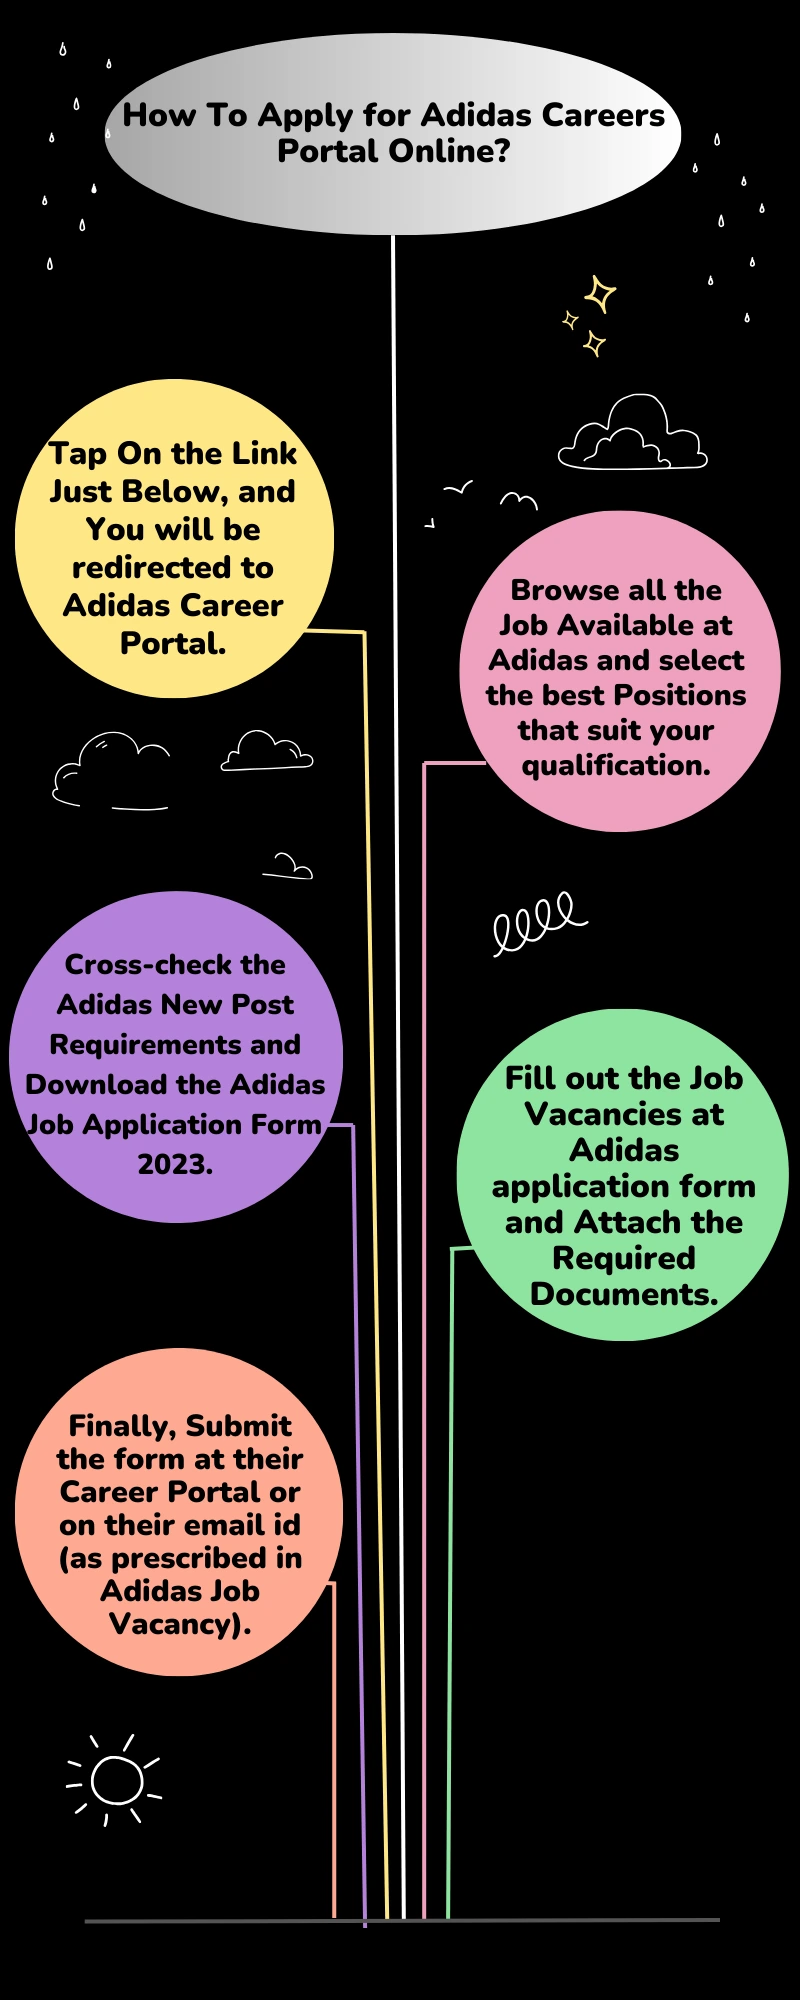 How To Apply for Adidas Careers Portal Online?